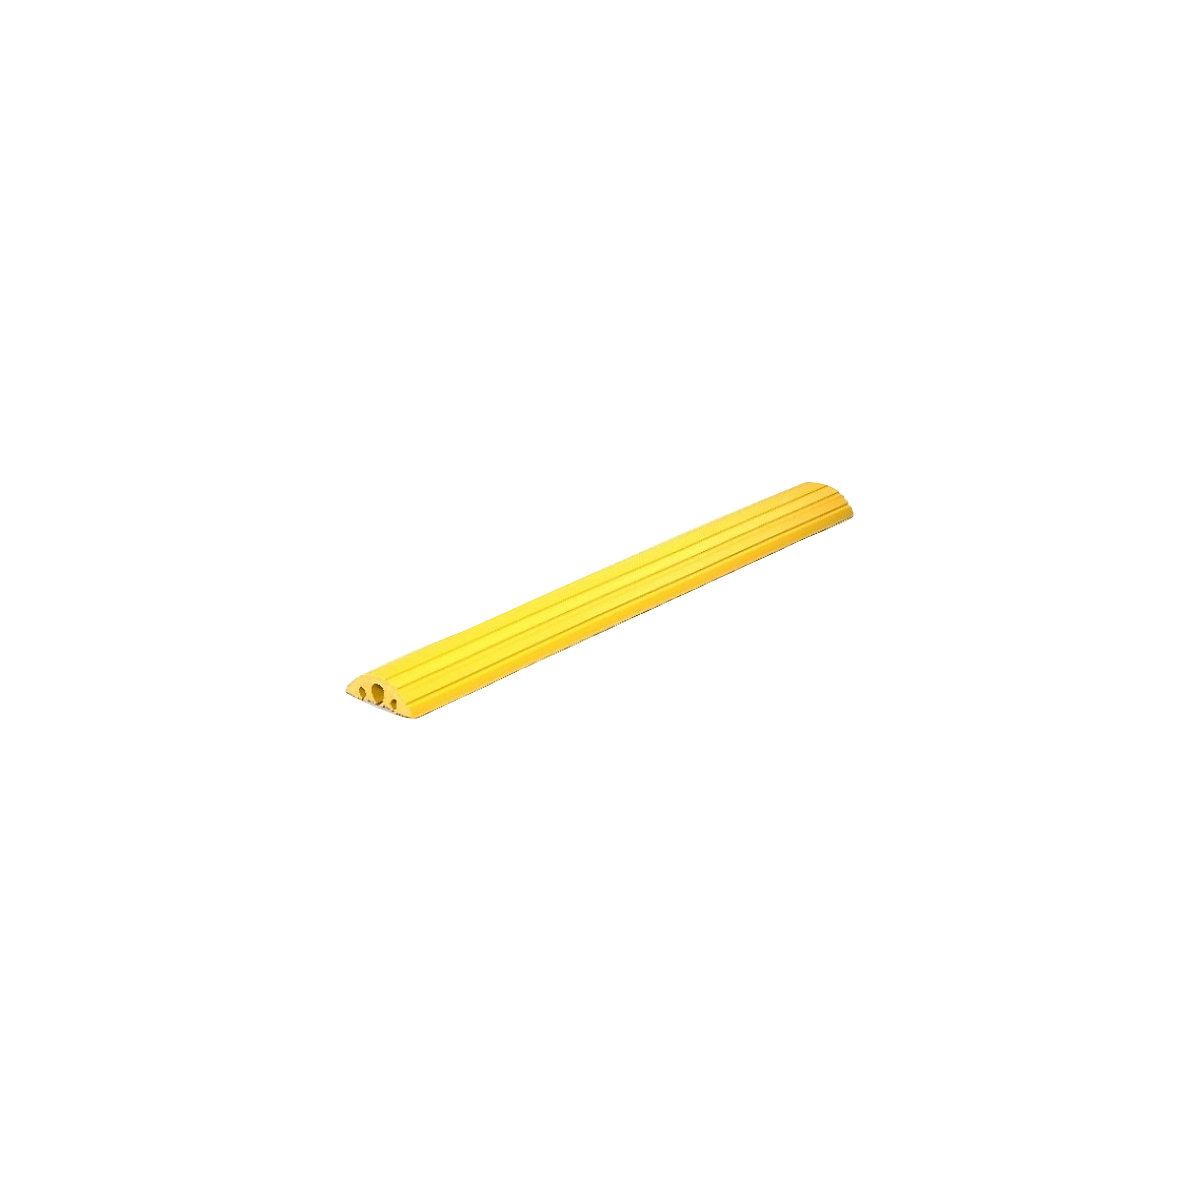 Hose and cable duct, for cable Ø up to 40 mm, yellow, LxWxH 1500 x 210 x 65 mm